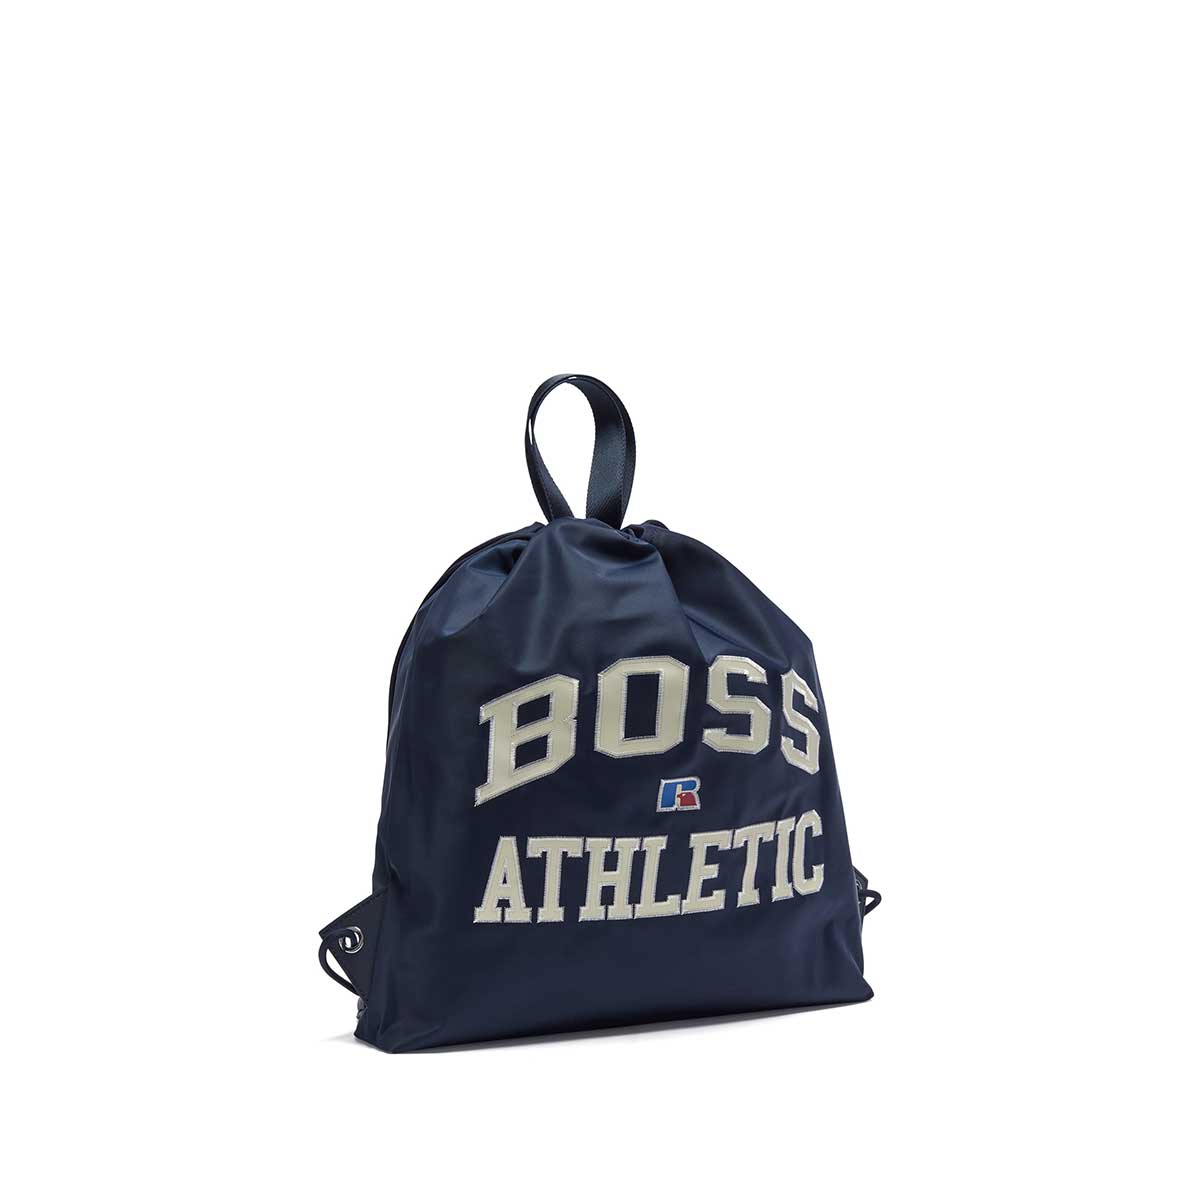 Boss Drawstring Bag In Lightweight Nylon With Exclusive Logo | LEVISONS